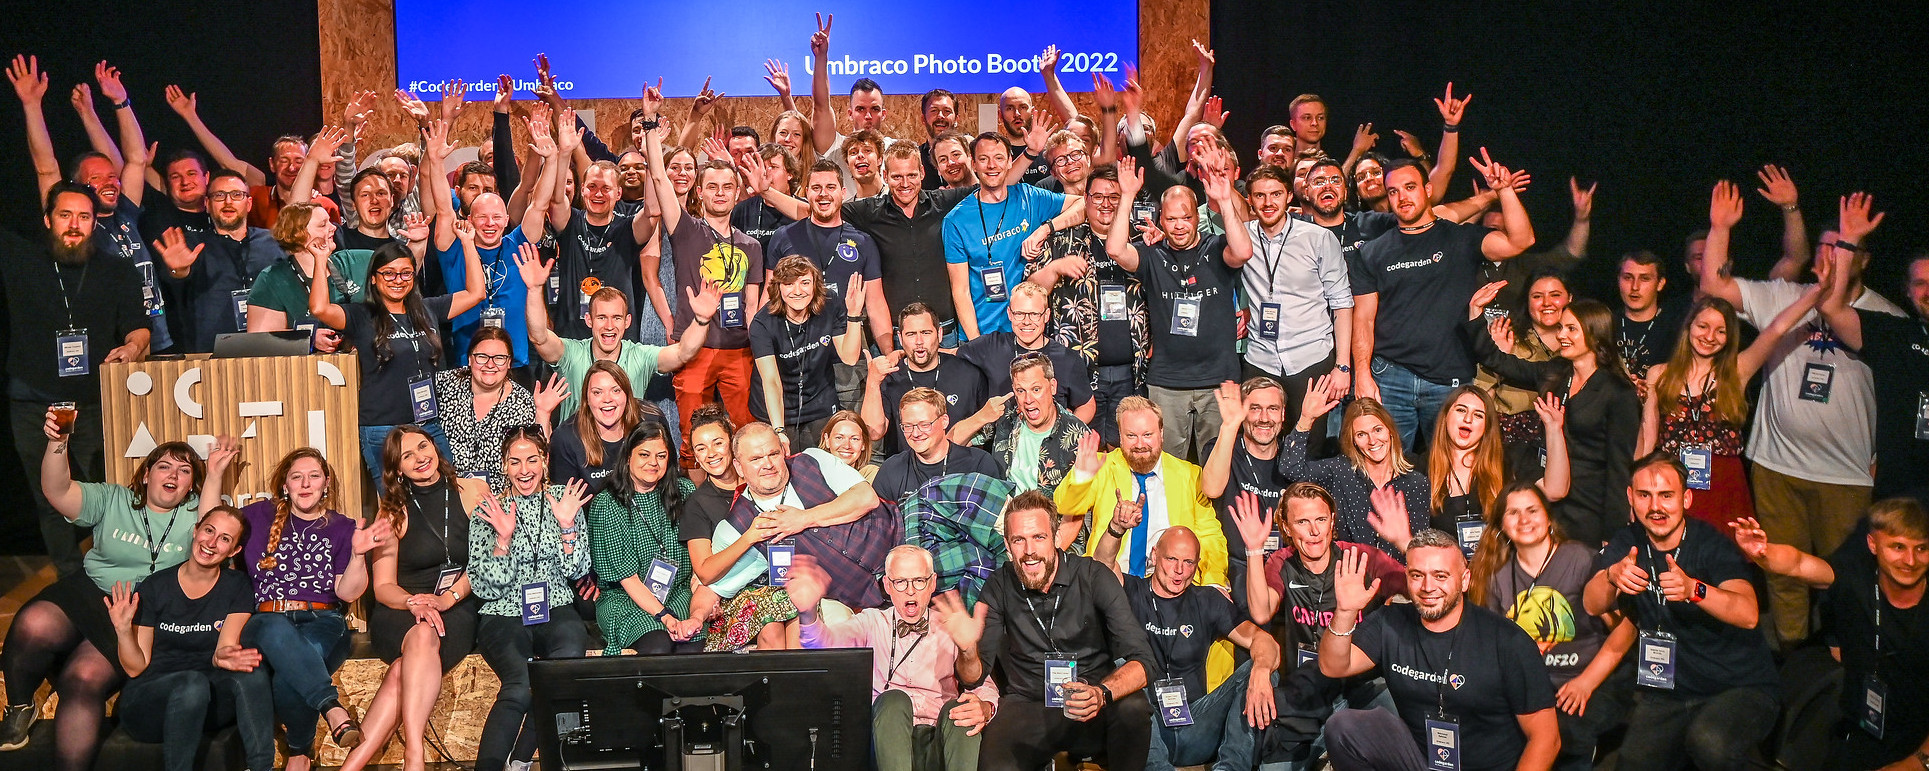 A photo by Umbraco HQ on Flickr of a group photo of HQ employees from Codegarden 2022. They have their hands raised in the air and are smiling and cheering.